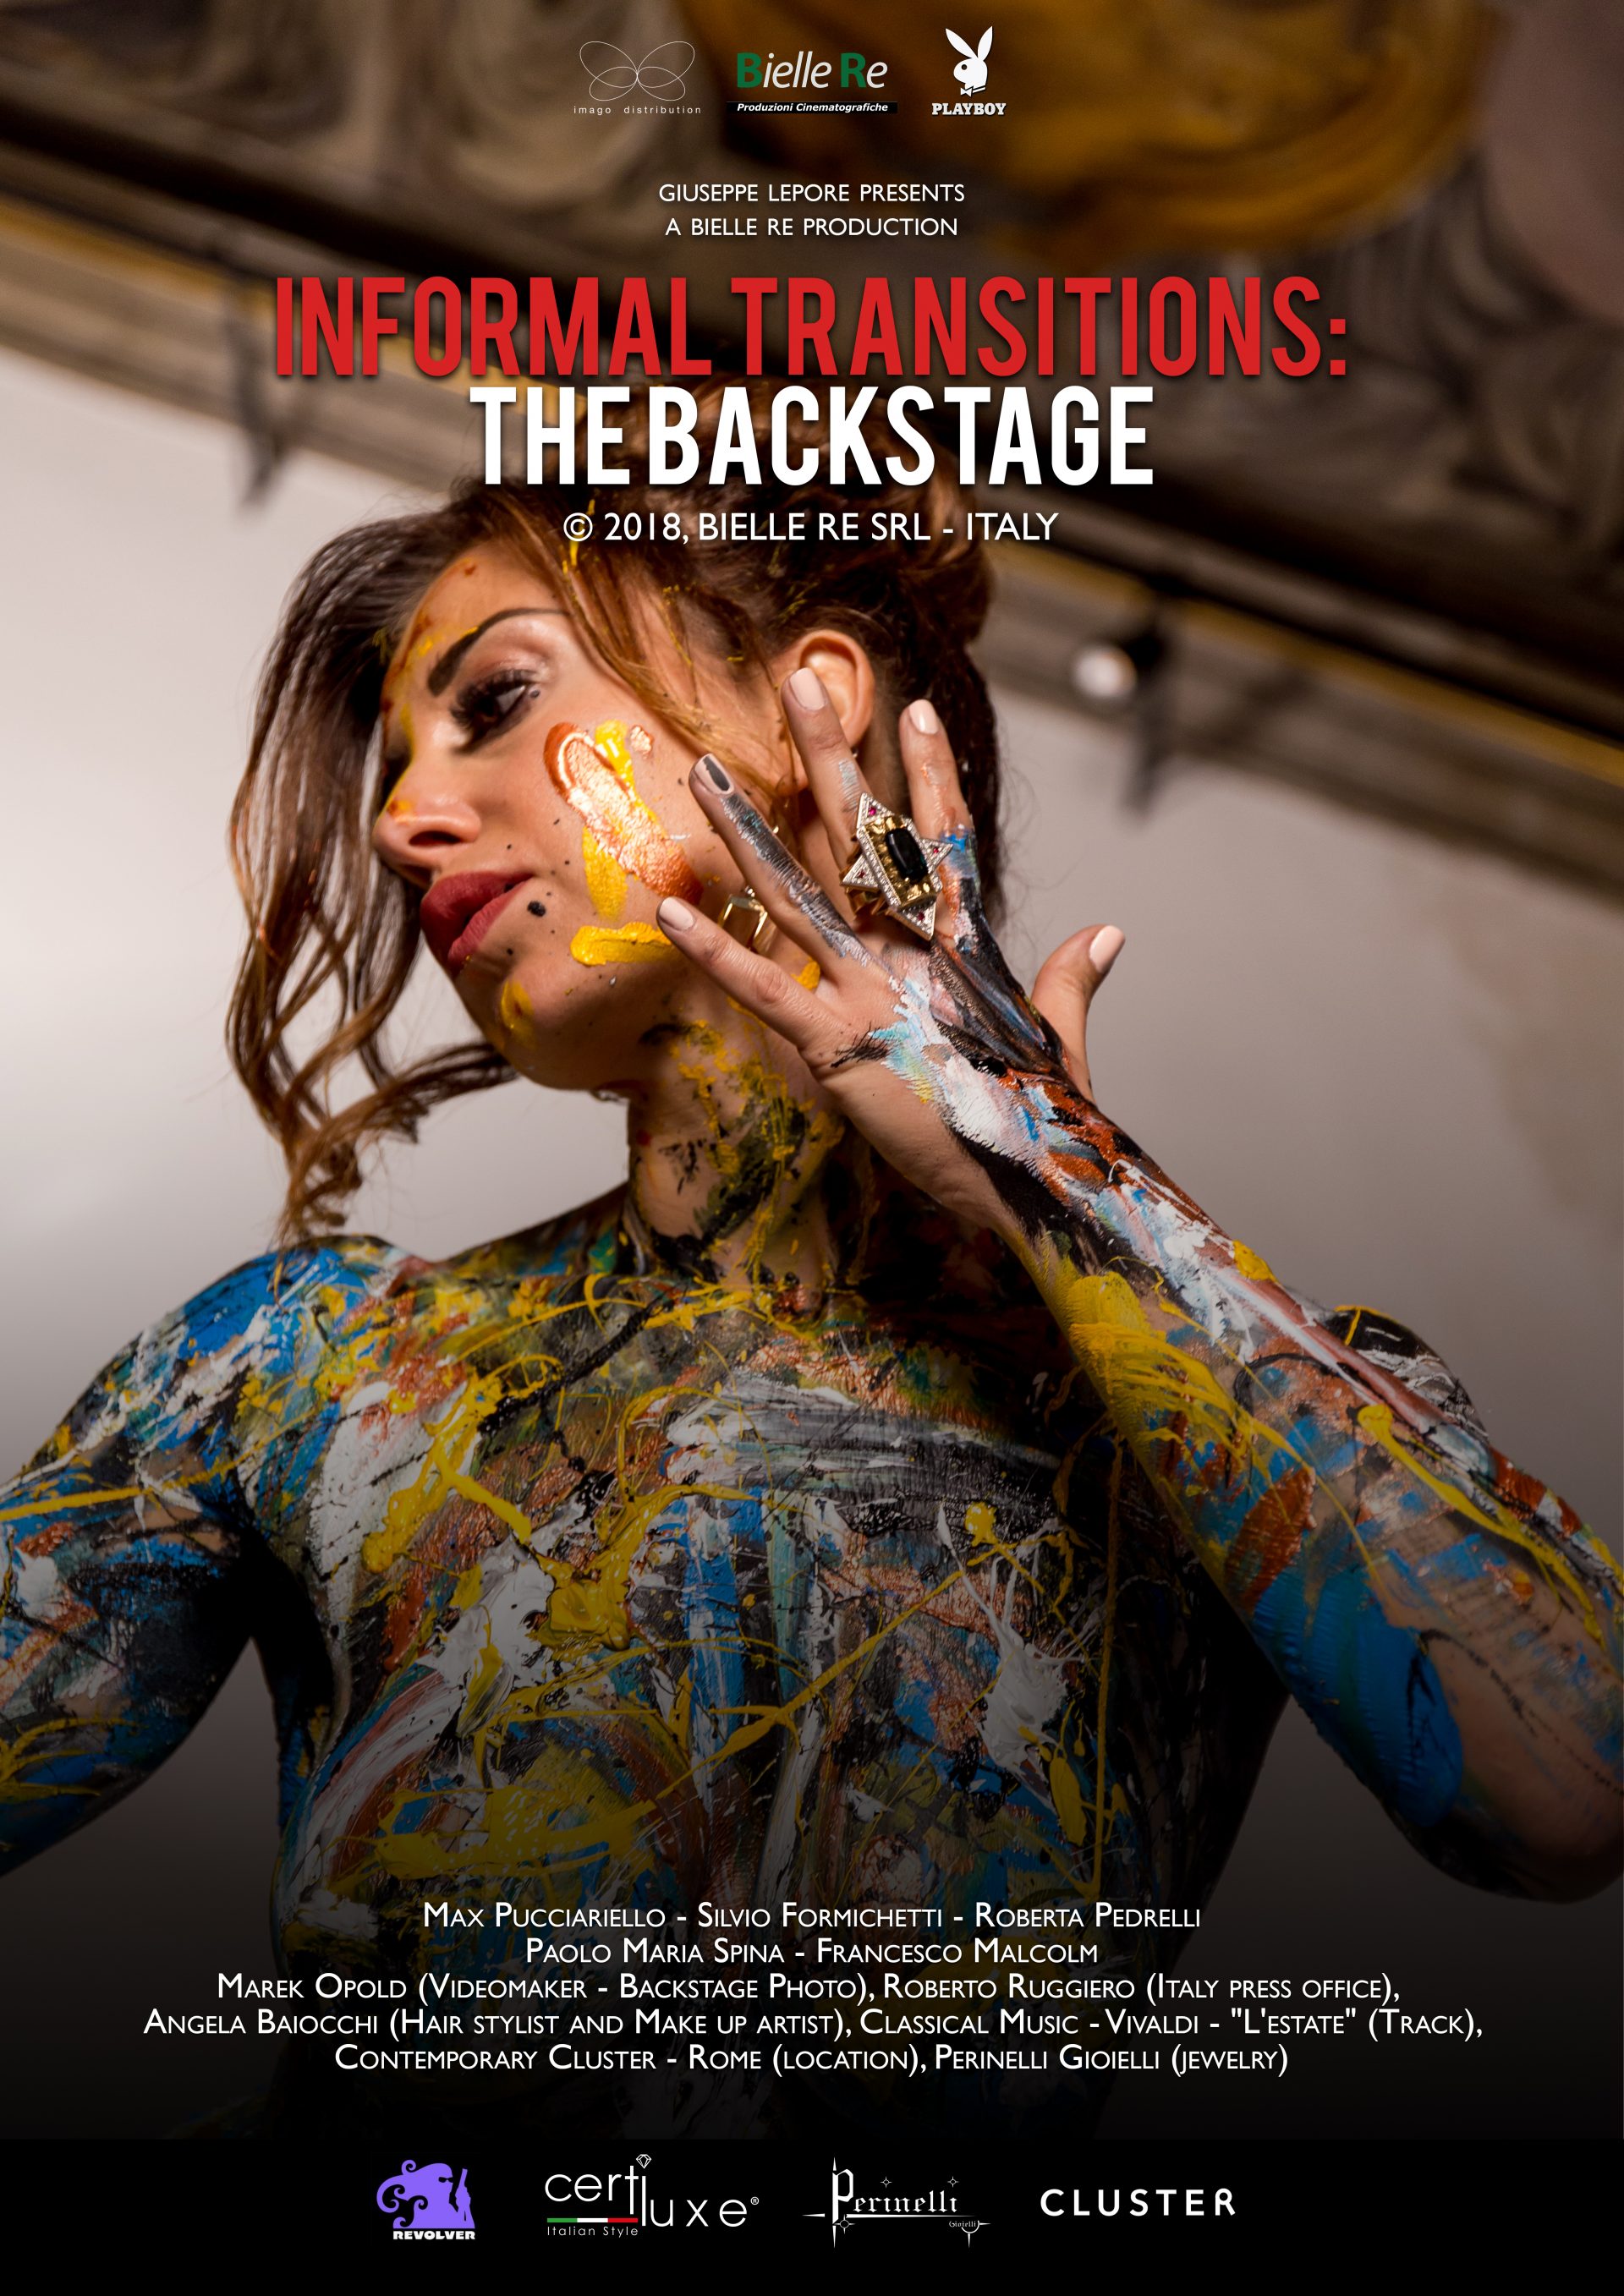 INFORMAL TRANSITIONS: THE BACKSTAGE